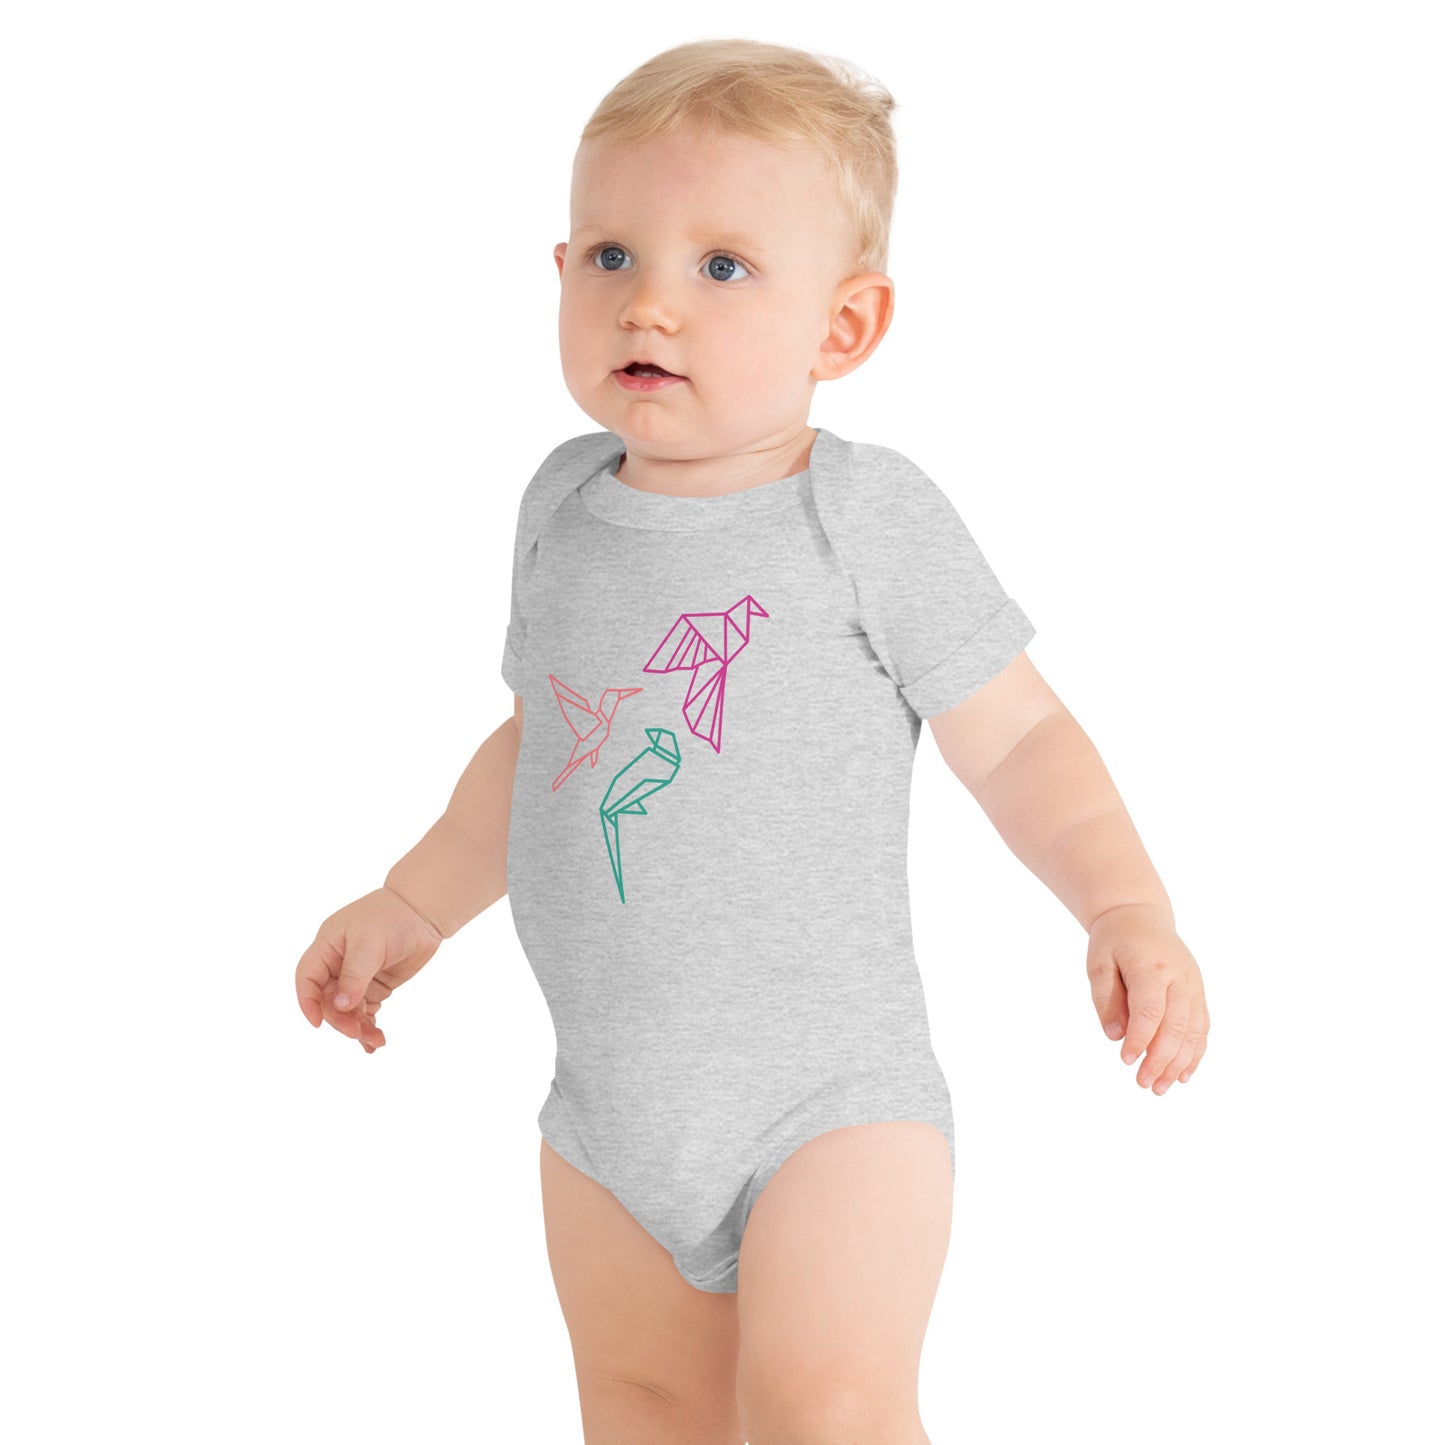 Baby with a light grey short sleeve one piece with three birds in Orange, Green and Pink